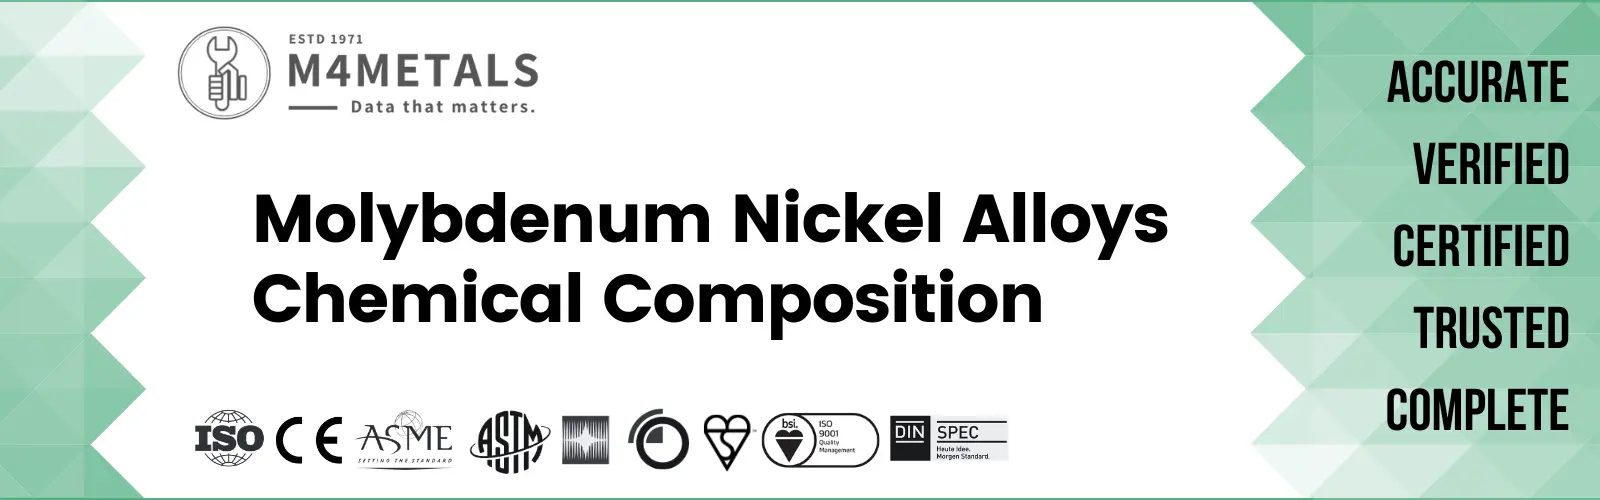 Molybdenum Nickel-alloy Chemical Composition